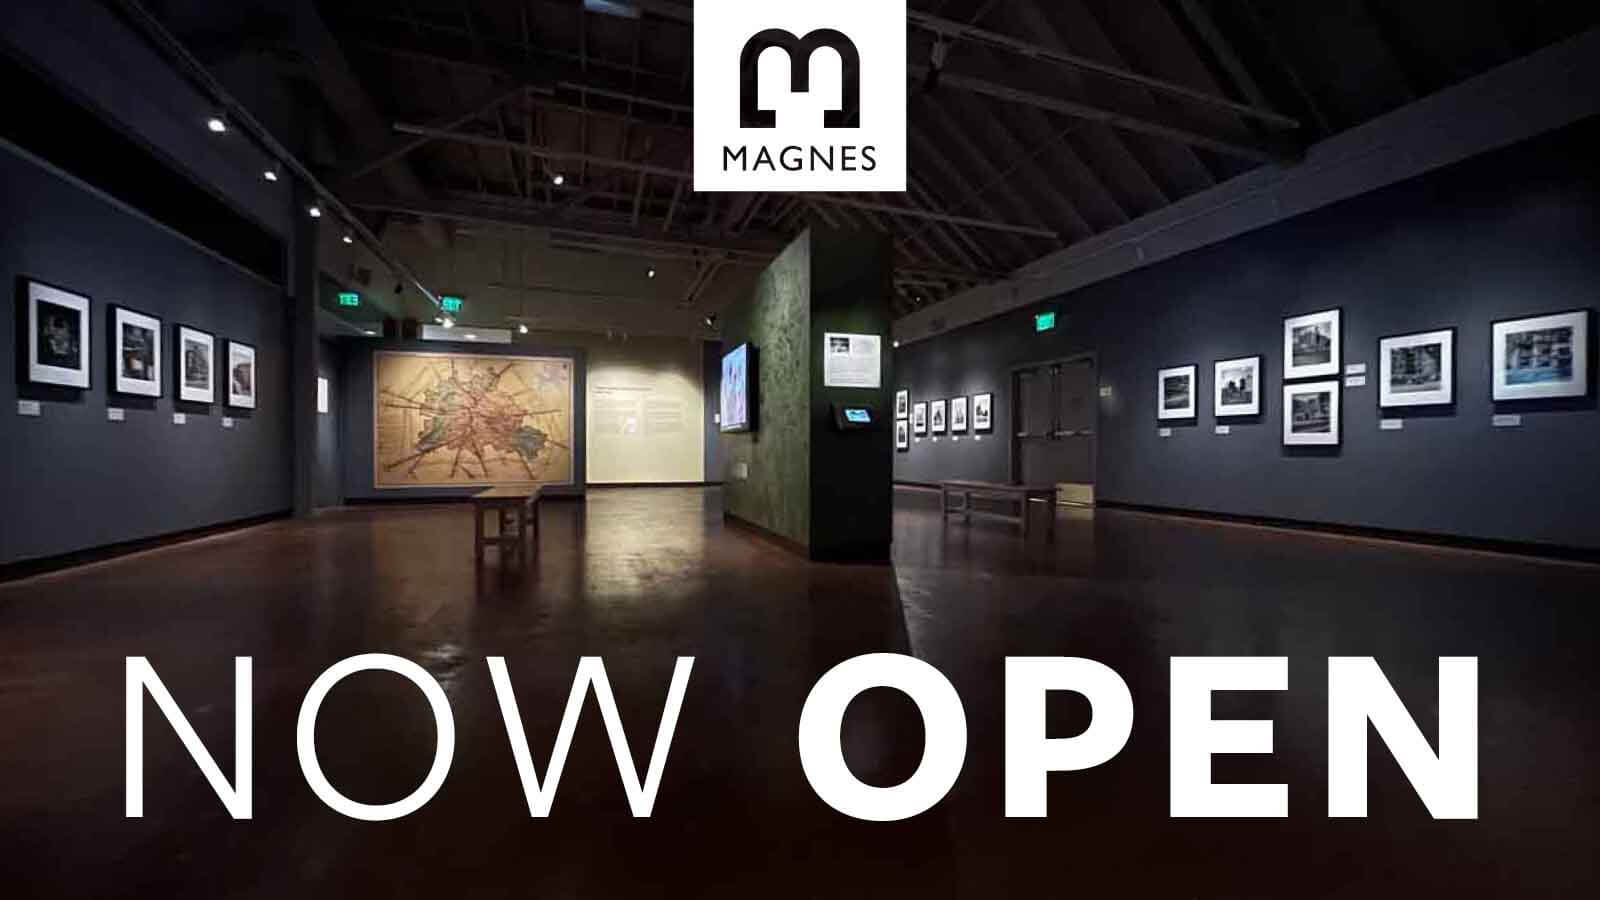 The Magnes now open [image of Cities and Wars exhibition]